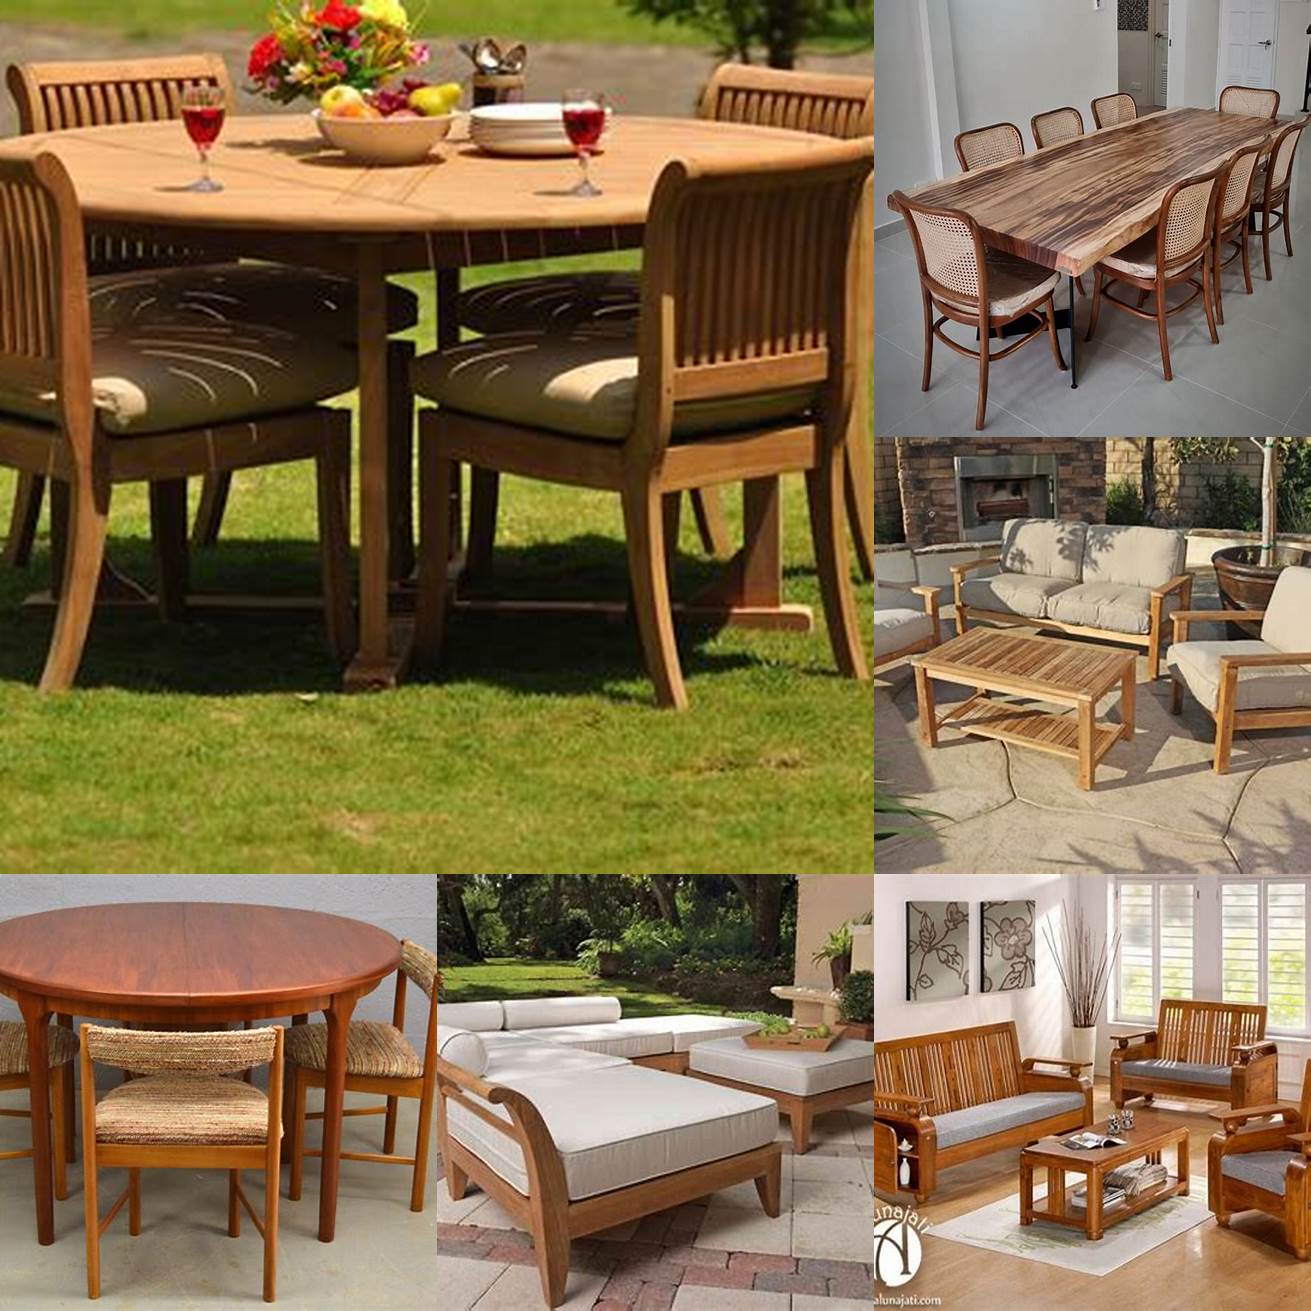 Different styles of teak furniture